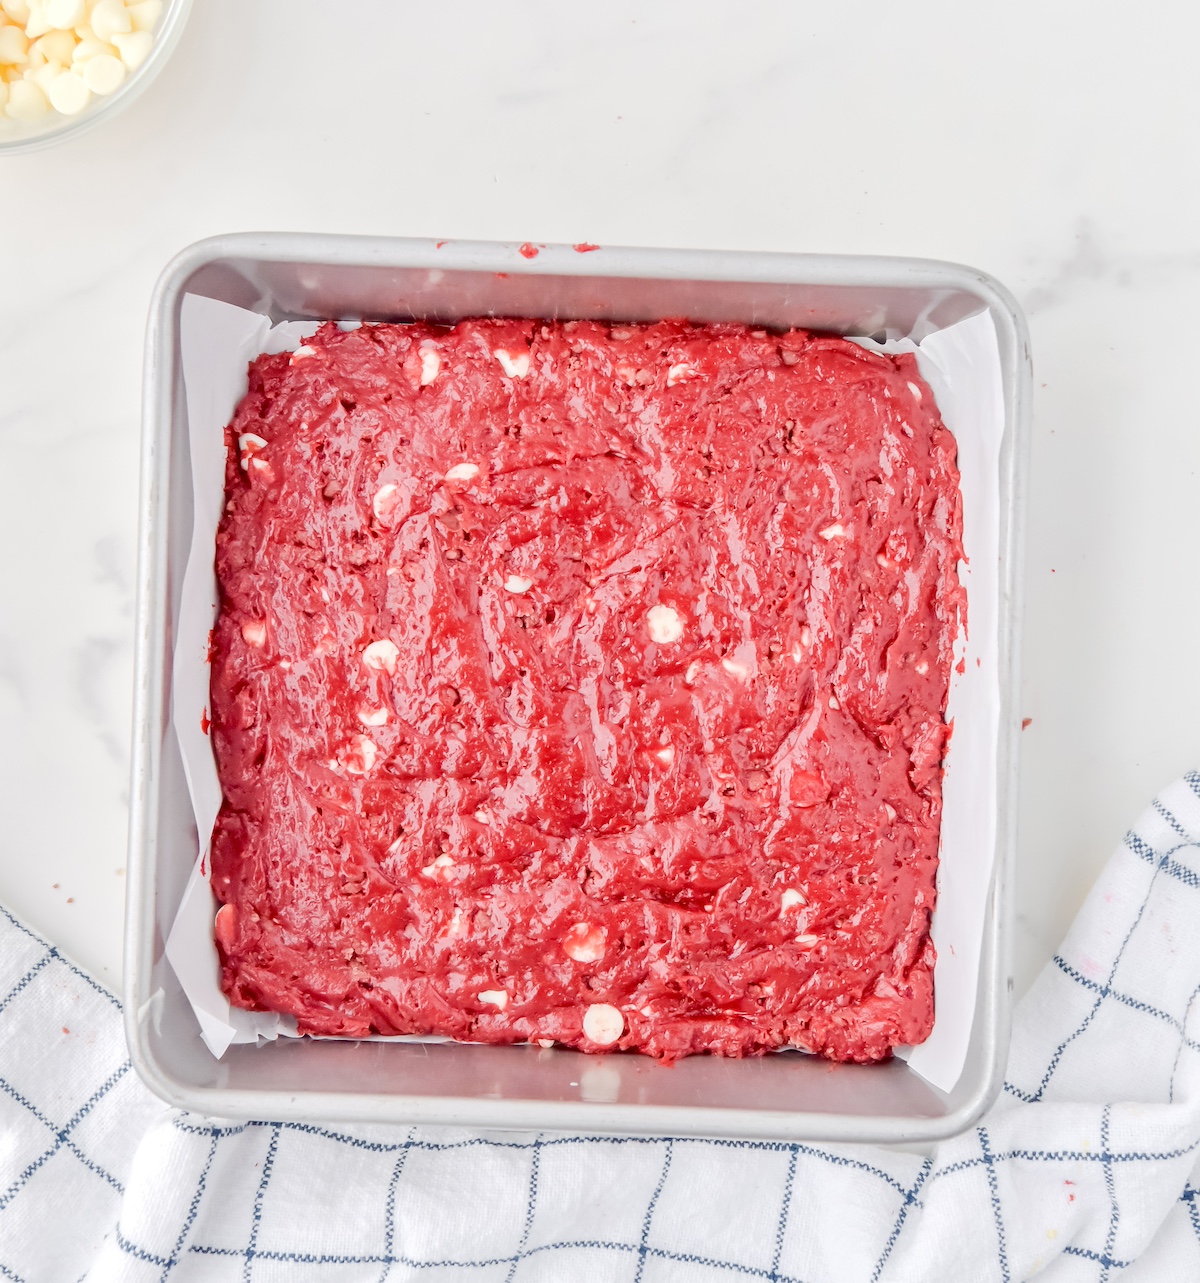 Red velvet batter spread out in a square pan